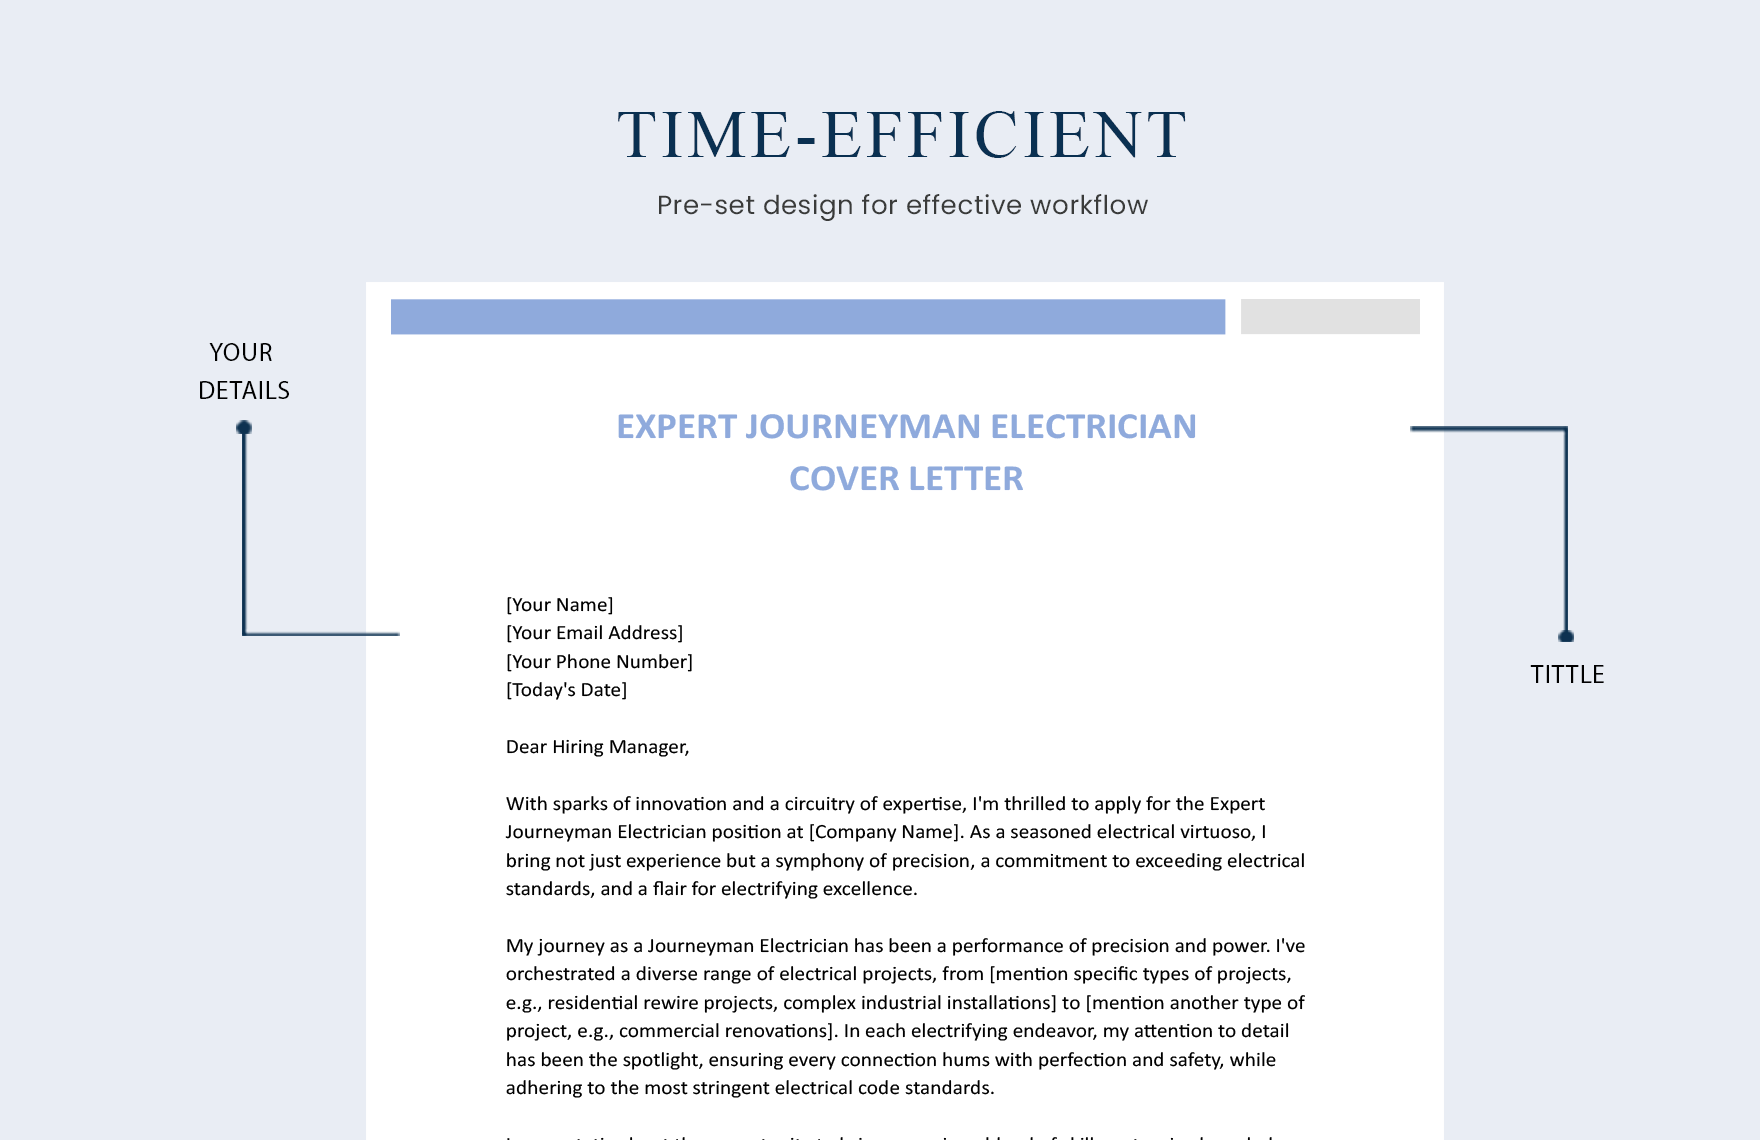 Expert Journeyman Electrician Cover Letter